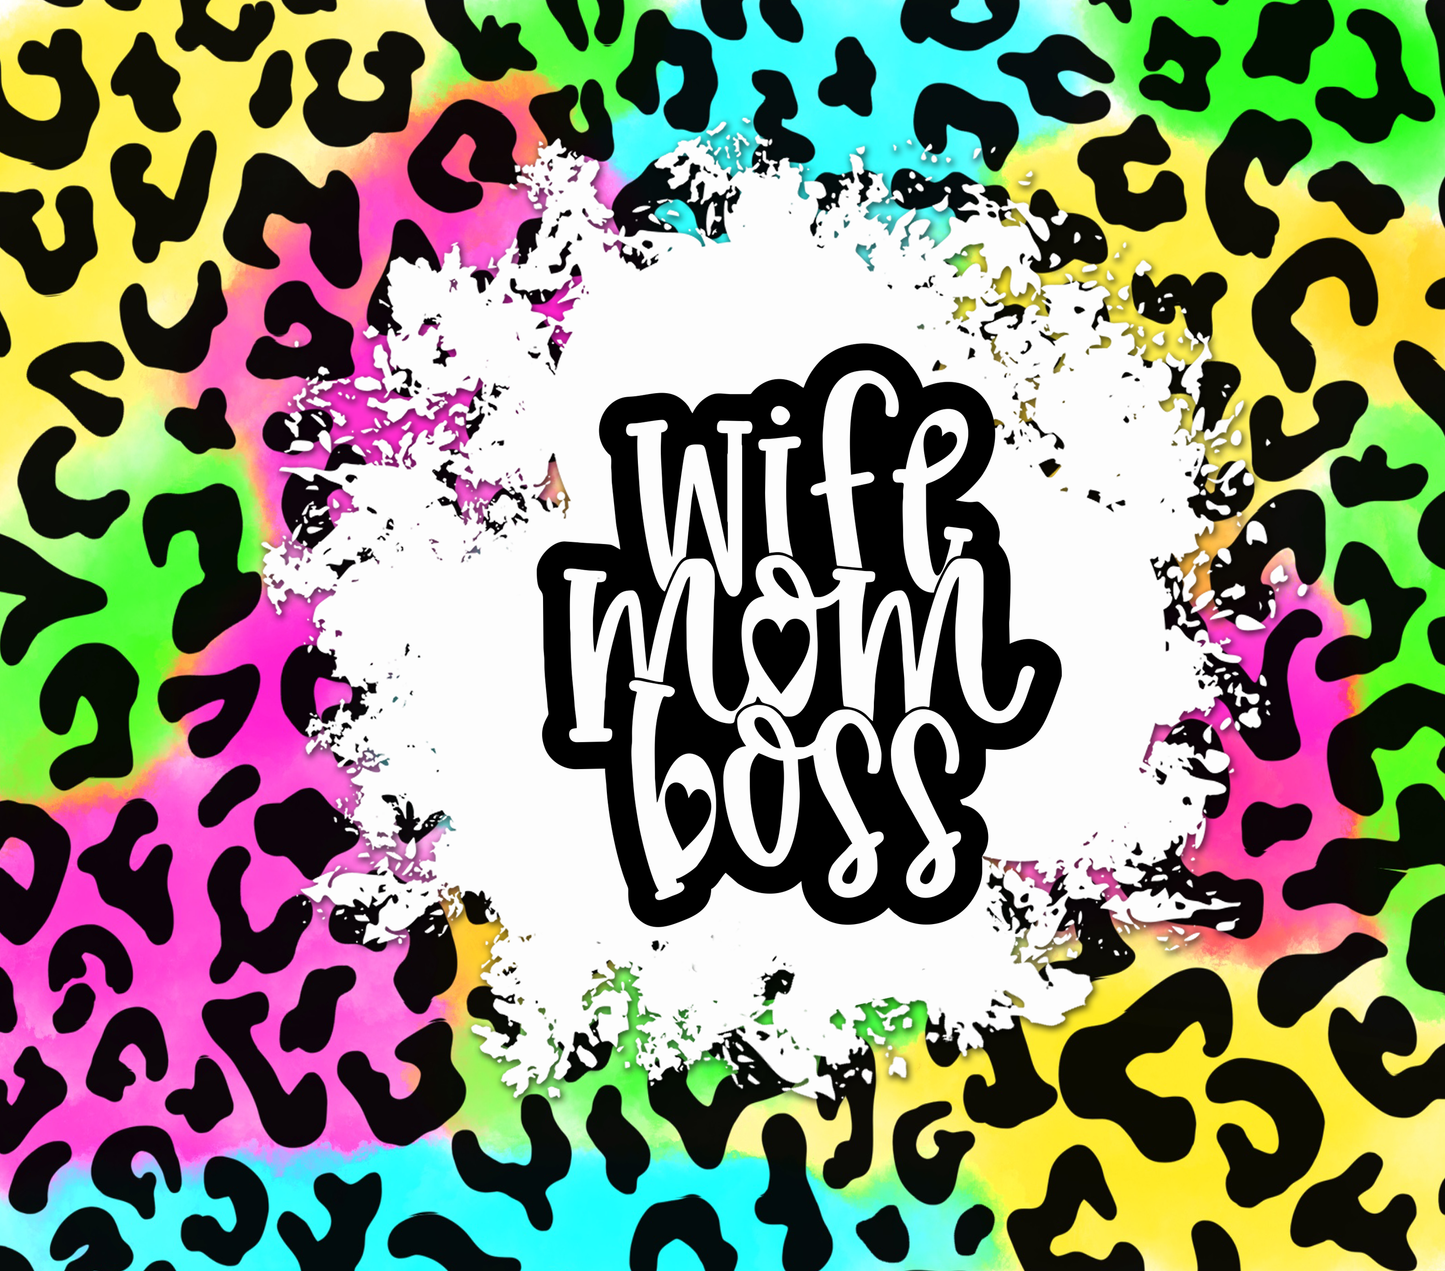 Colorful Cheetah Wife Mom Boss - 20 Oz Sublimation Transfer